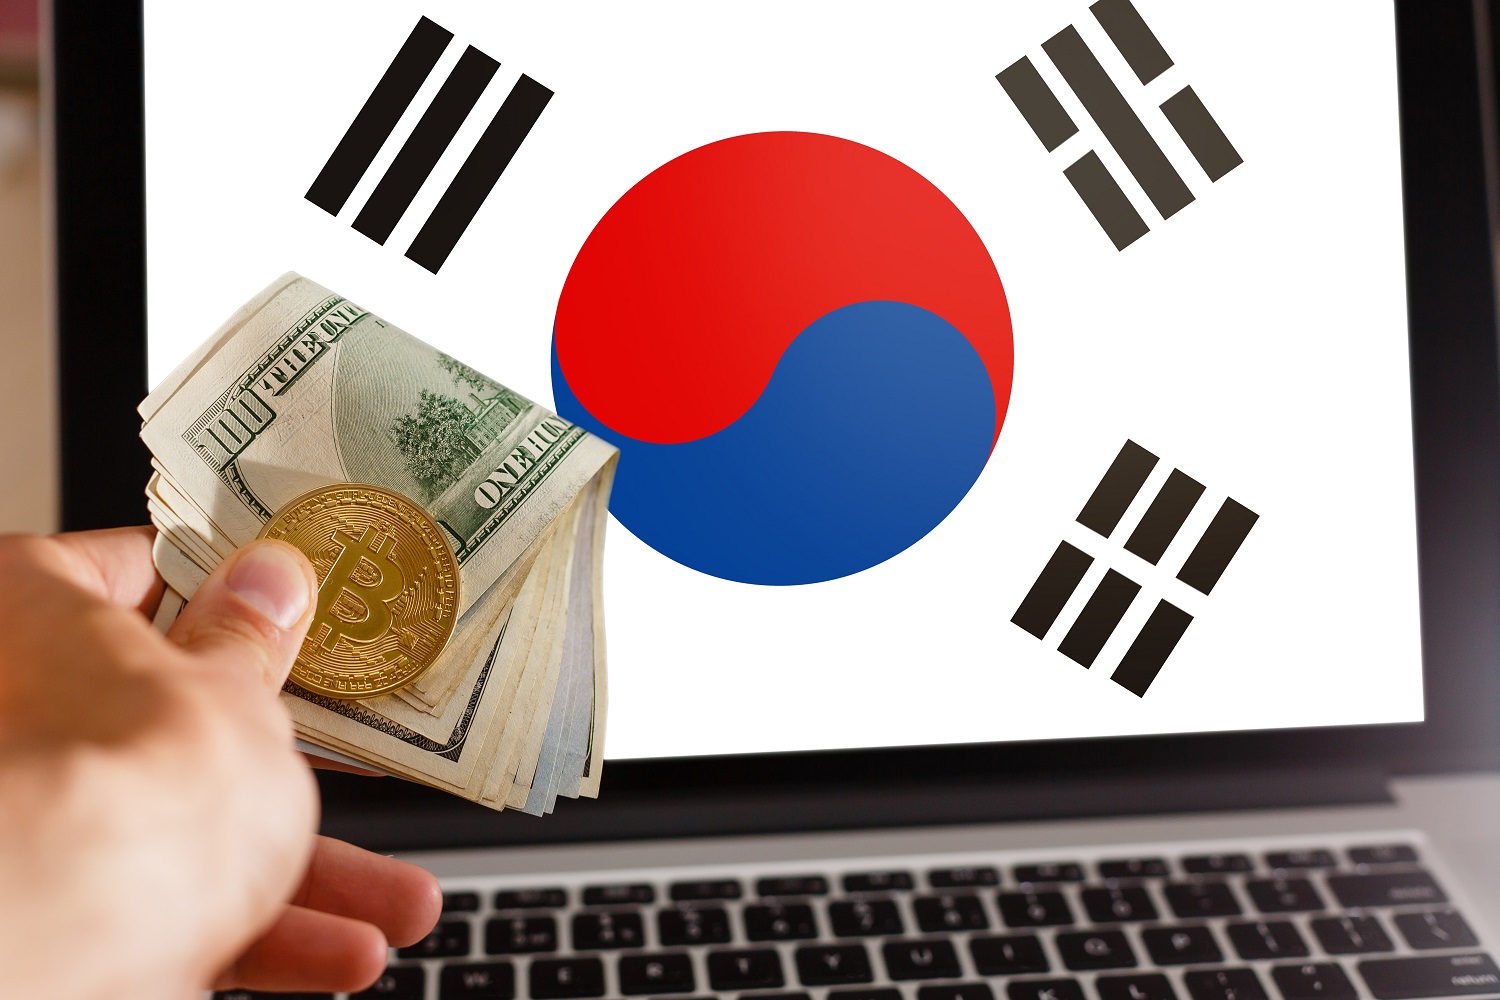 S Korean Police Bust Two ‘Crypto Scam Rings’ Worth a Combined $350m – Crypto Fraud on the Rise? thumbnail